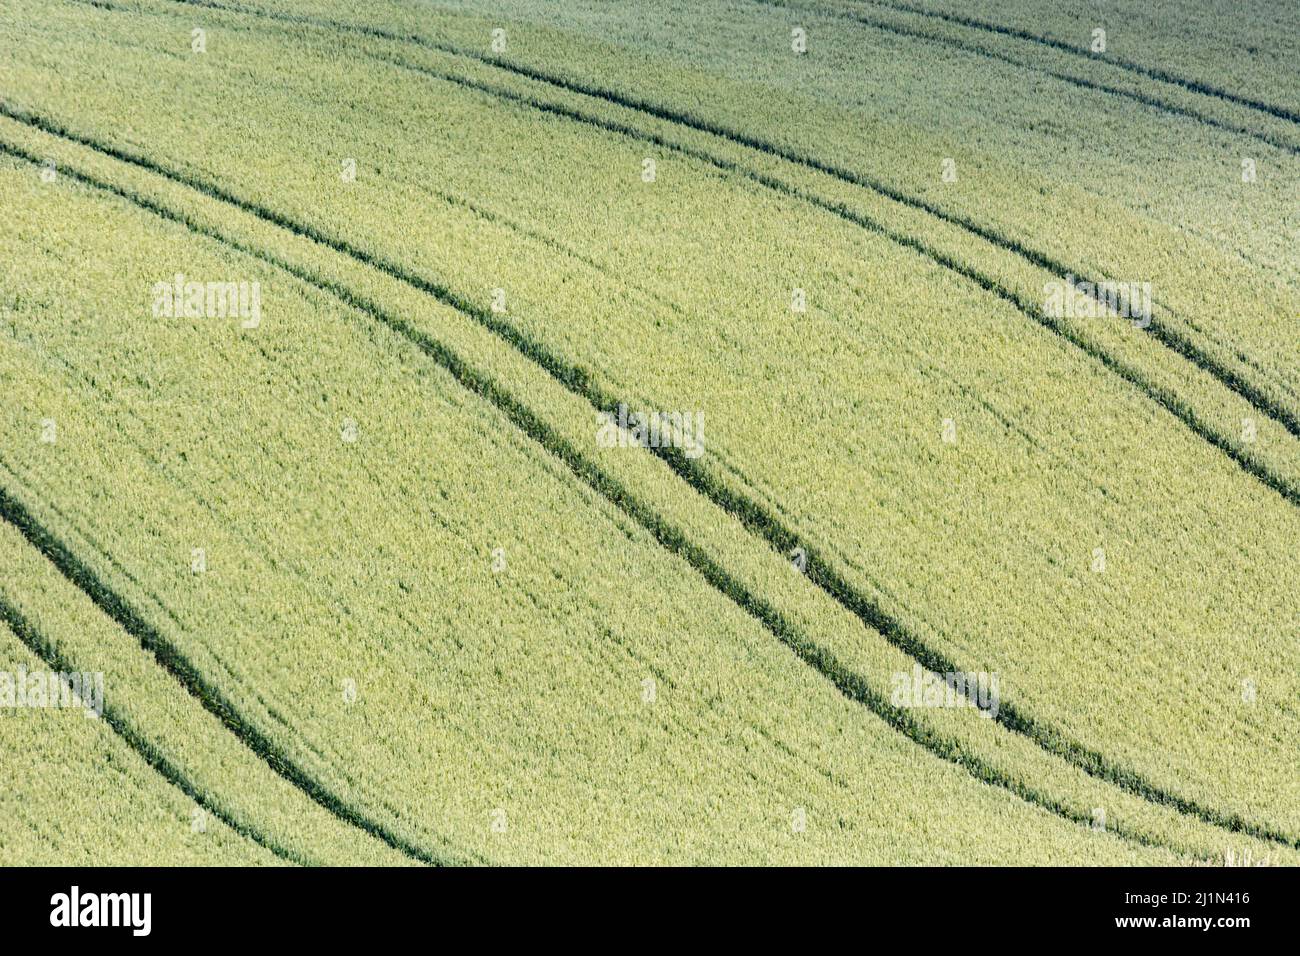 Green fields of England concept. In particular a field of barley / Hordeum vulgare. Metaphor for concept of famine, food security, food supply UK. Stock Photo